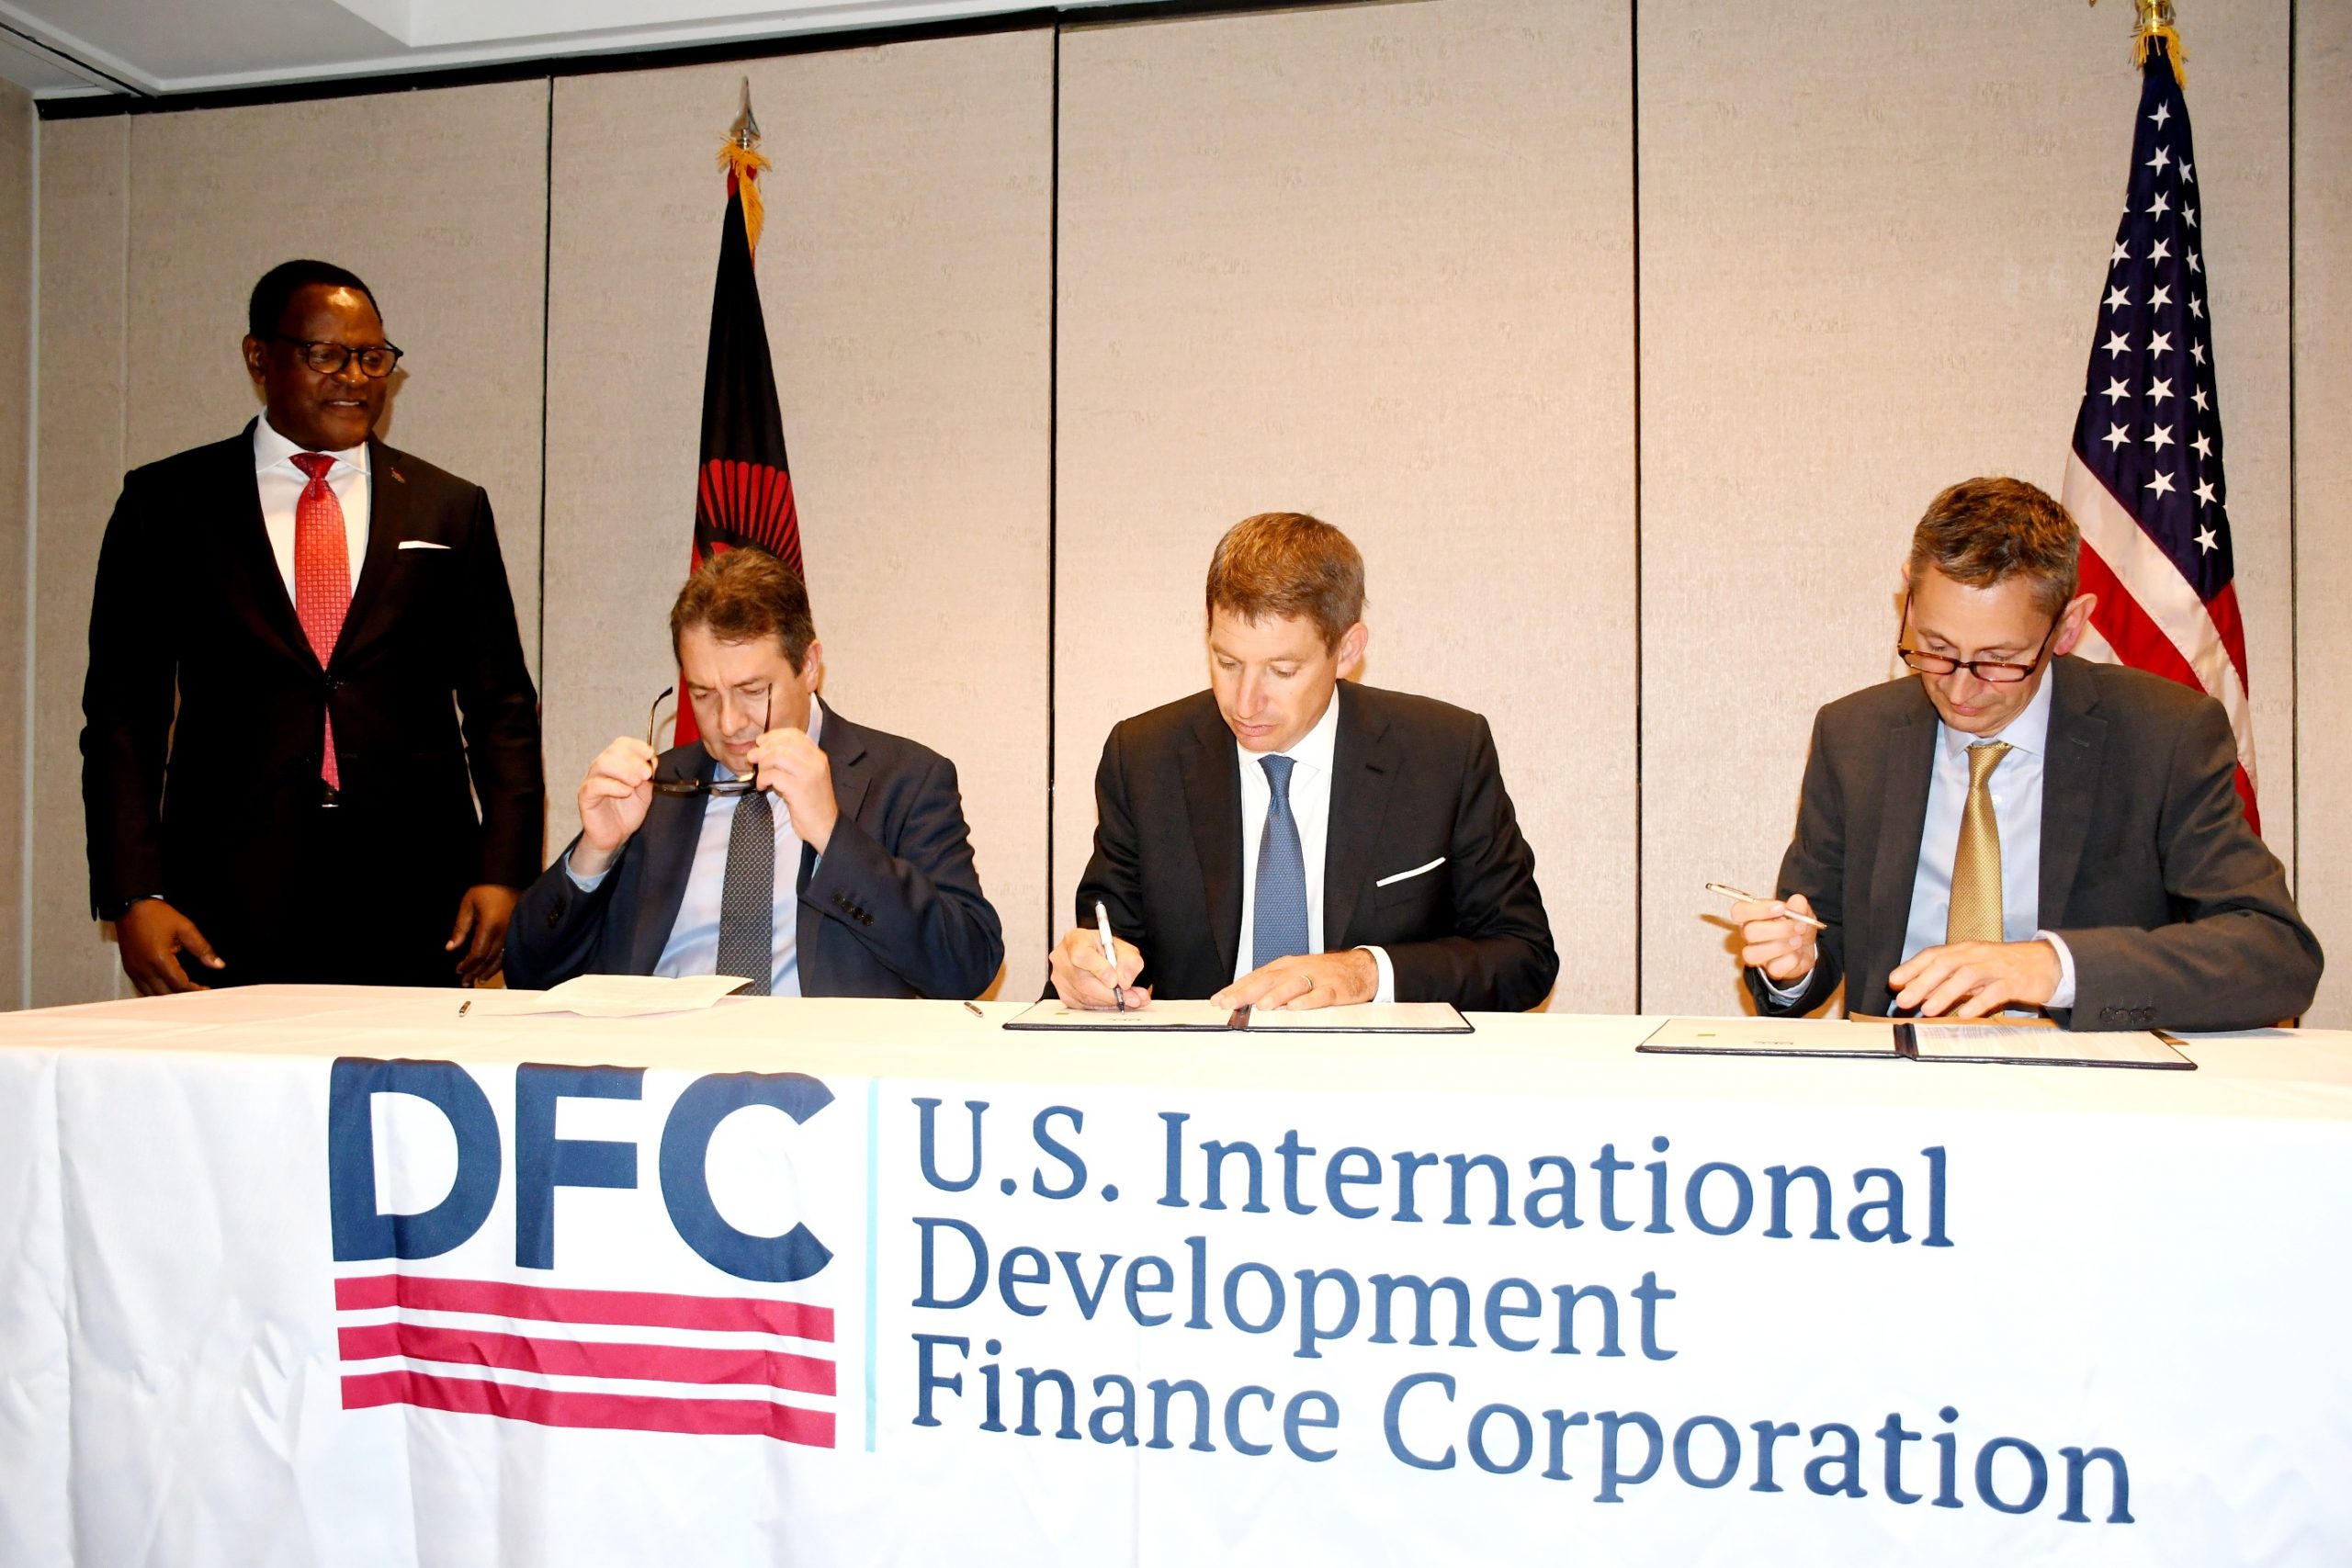 CEO for International Development Finance Corporation Scott Nathan signs the Commitment letter on behalf of US Government- by Lisa Kadango Malango